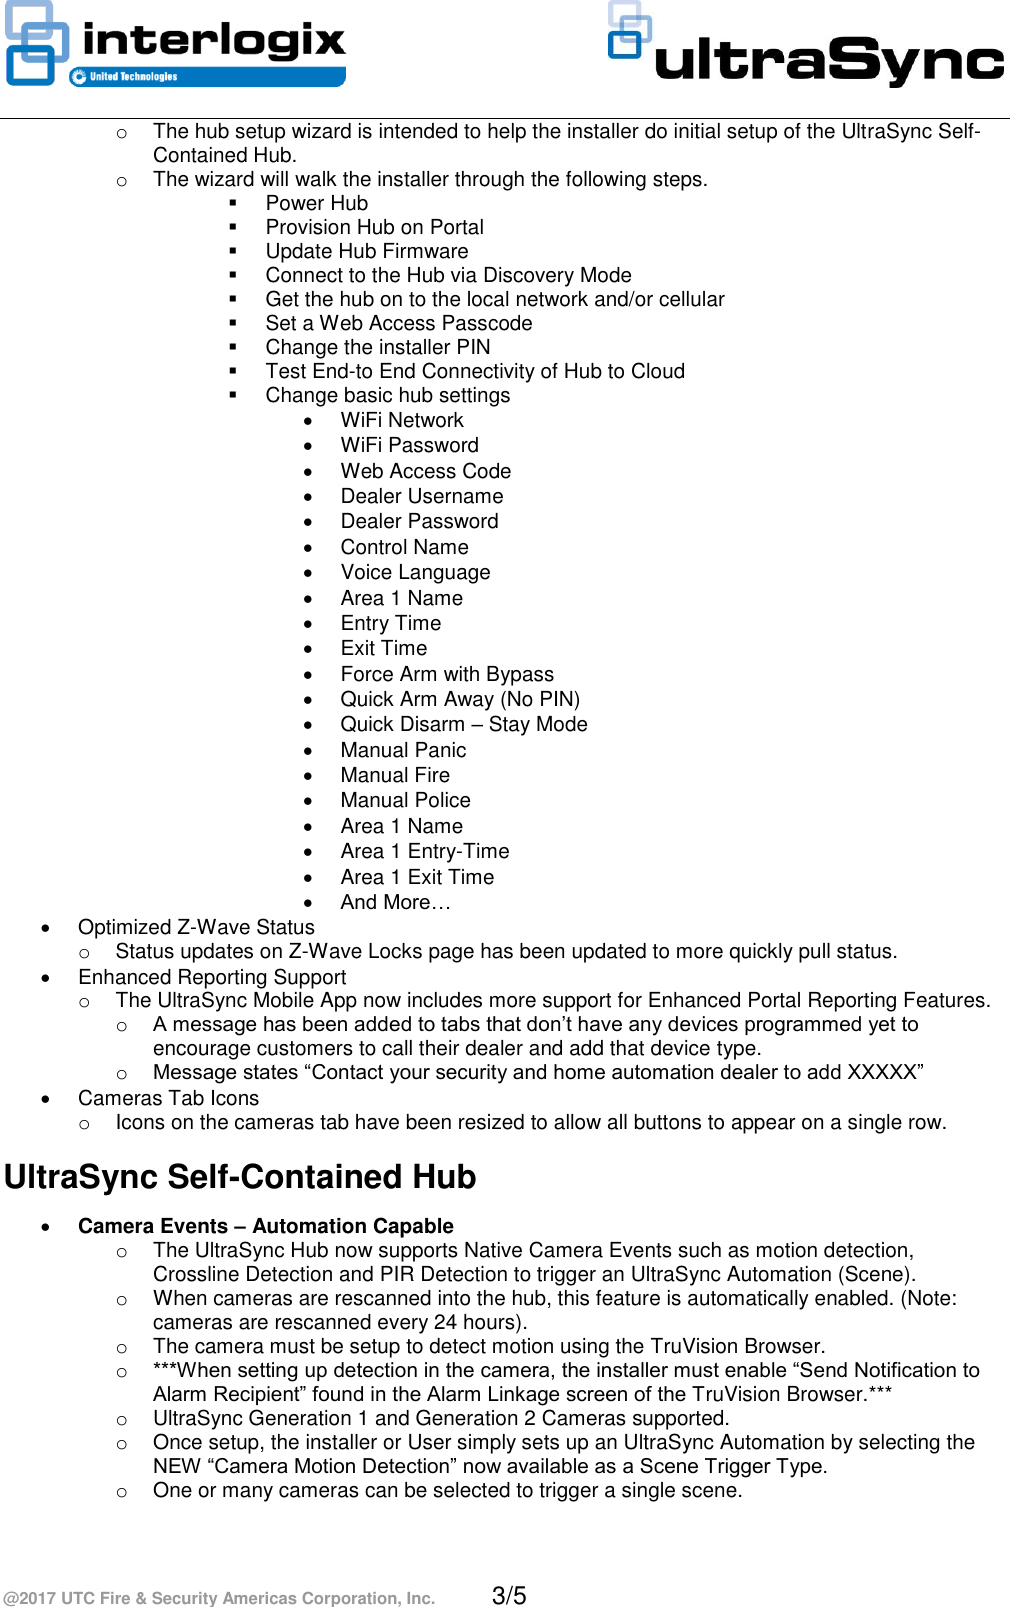 Page 3 of 5 - InterLogix Ultrasync-3.2-Service-Release-Notes UltraSec Release Note User Manual